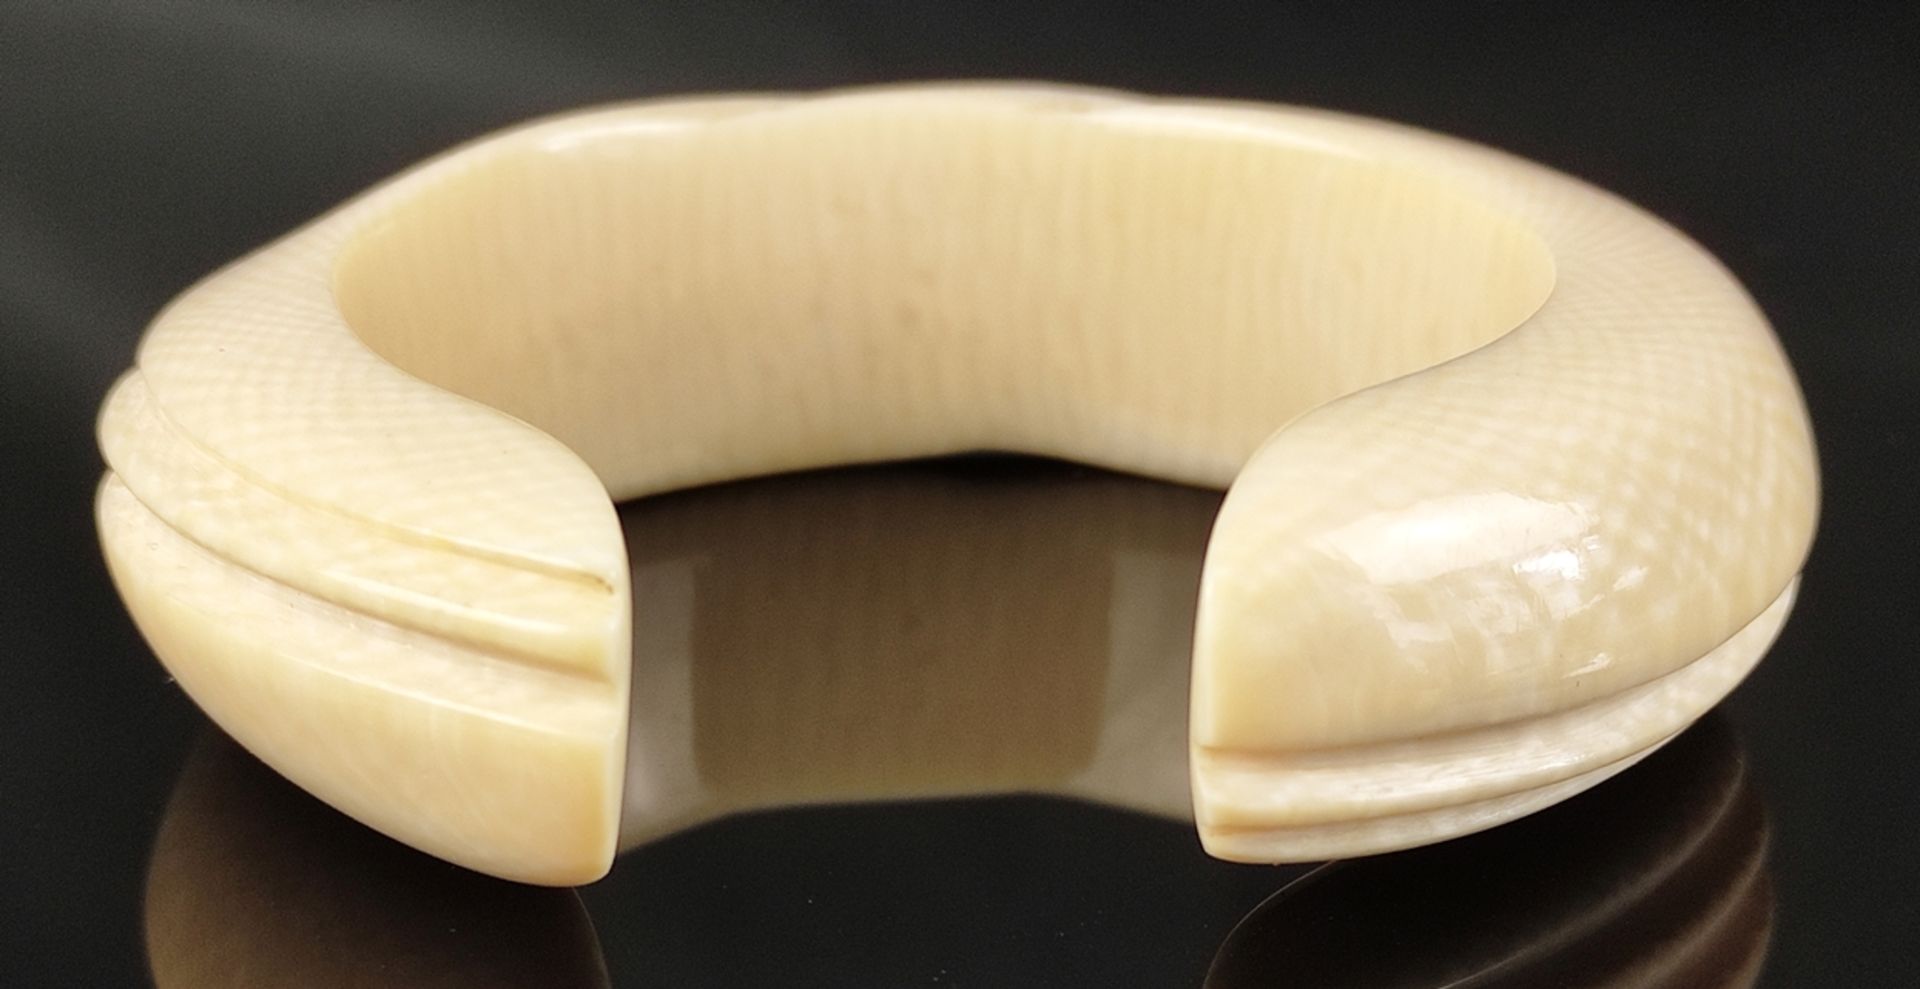 Bangle, oval, ivory, 1950s, width approx. 2cm, diameter at largest point 5.5cm, for narrow wrist - Image 3 of 3